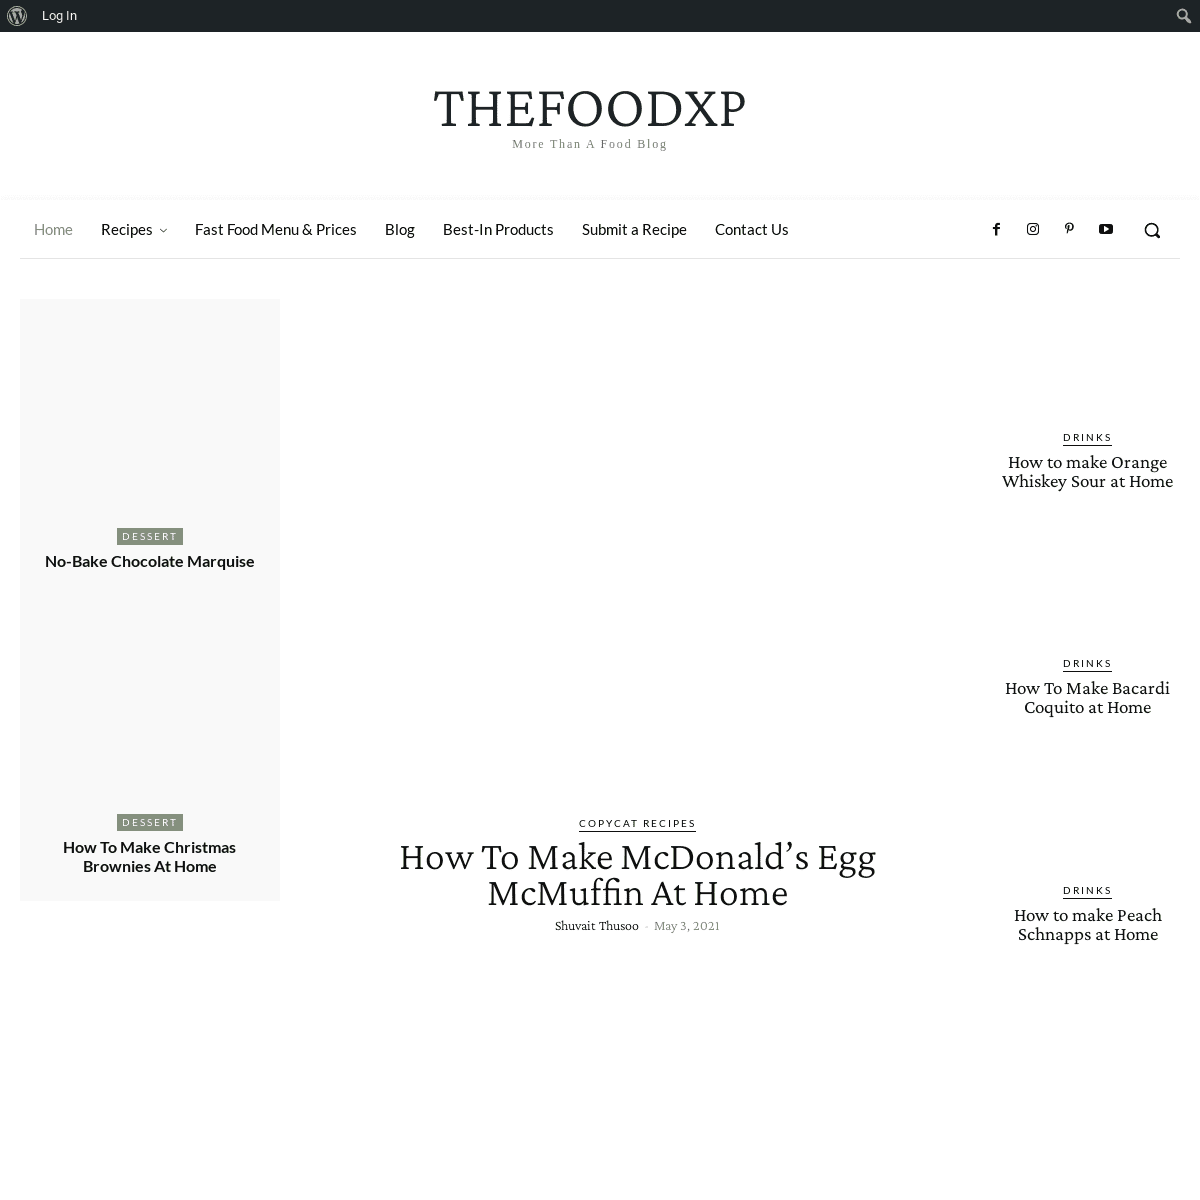 A complete backup of https://thefoodxp.com